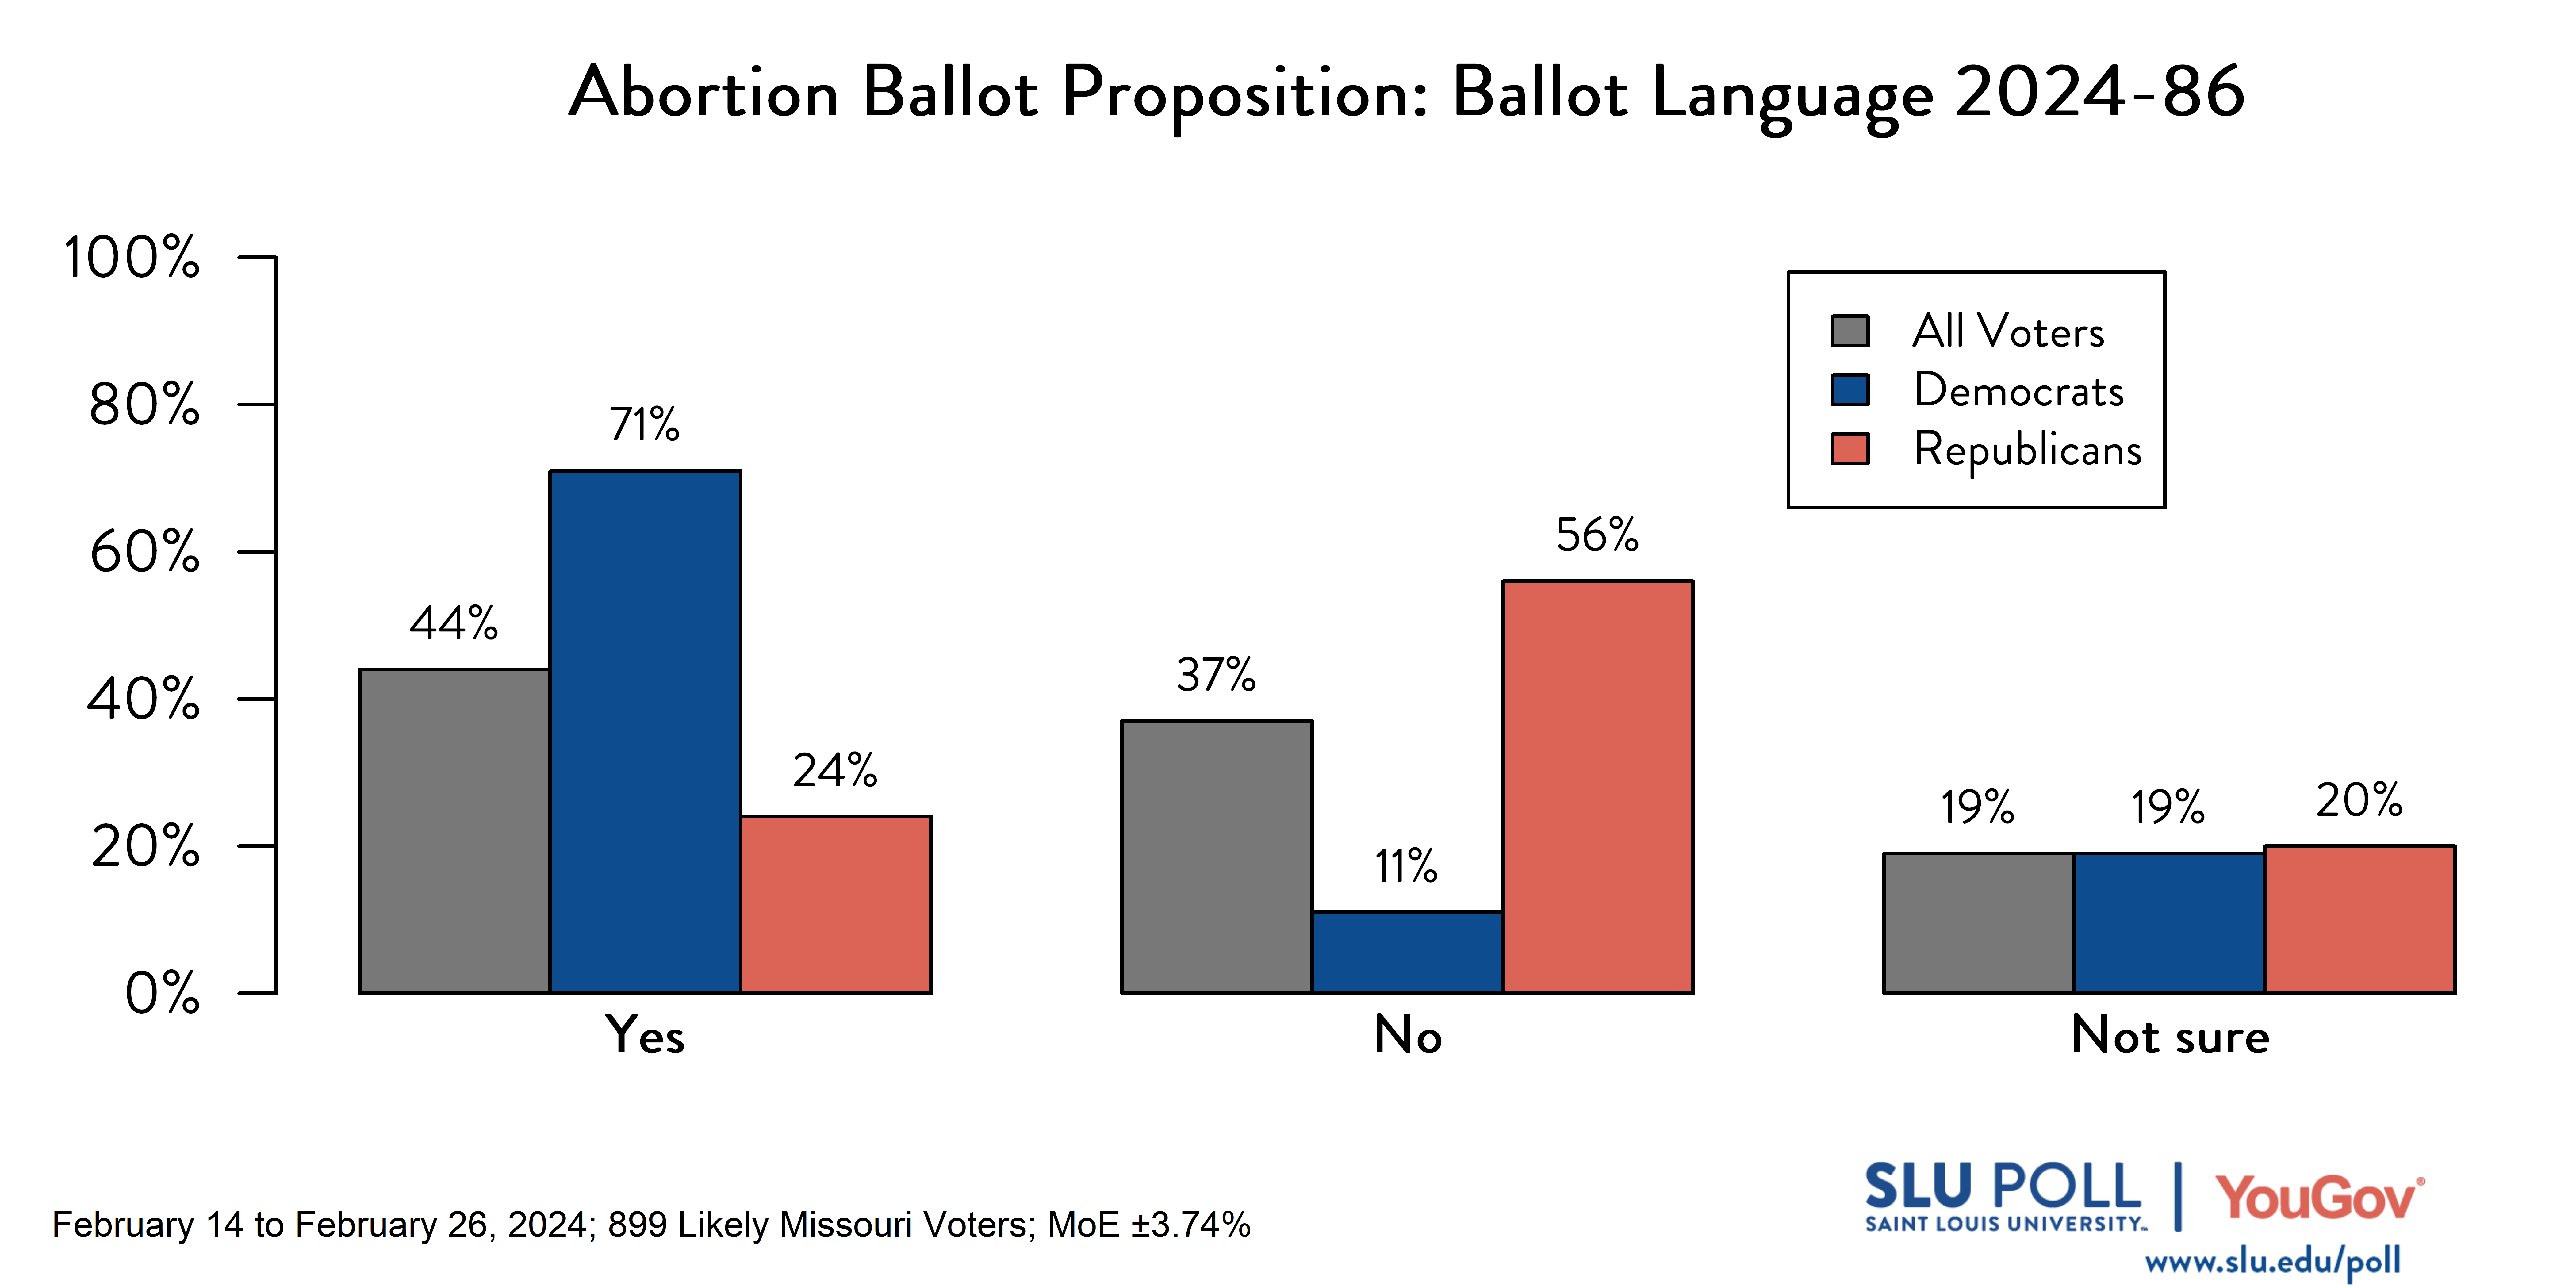 Bar graph of SLU/YouGov Poll results for abortion question. Results in caption